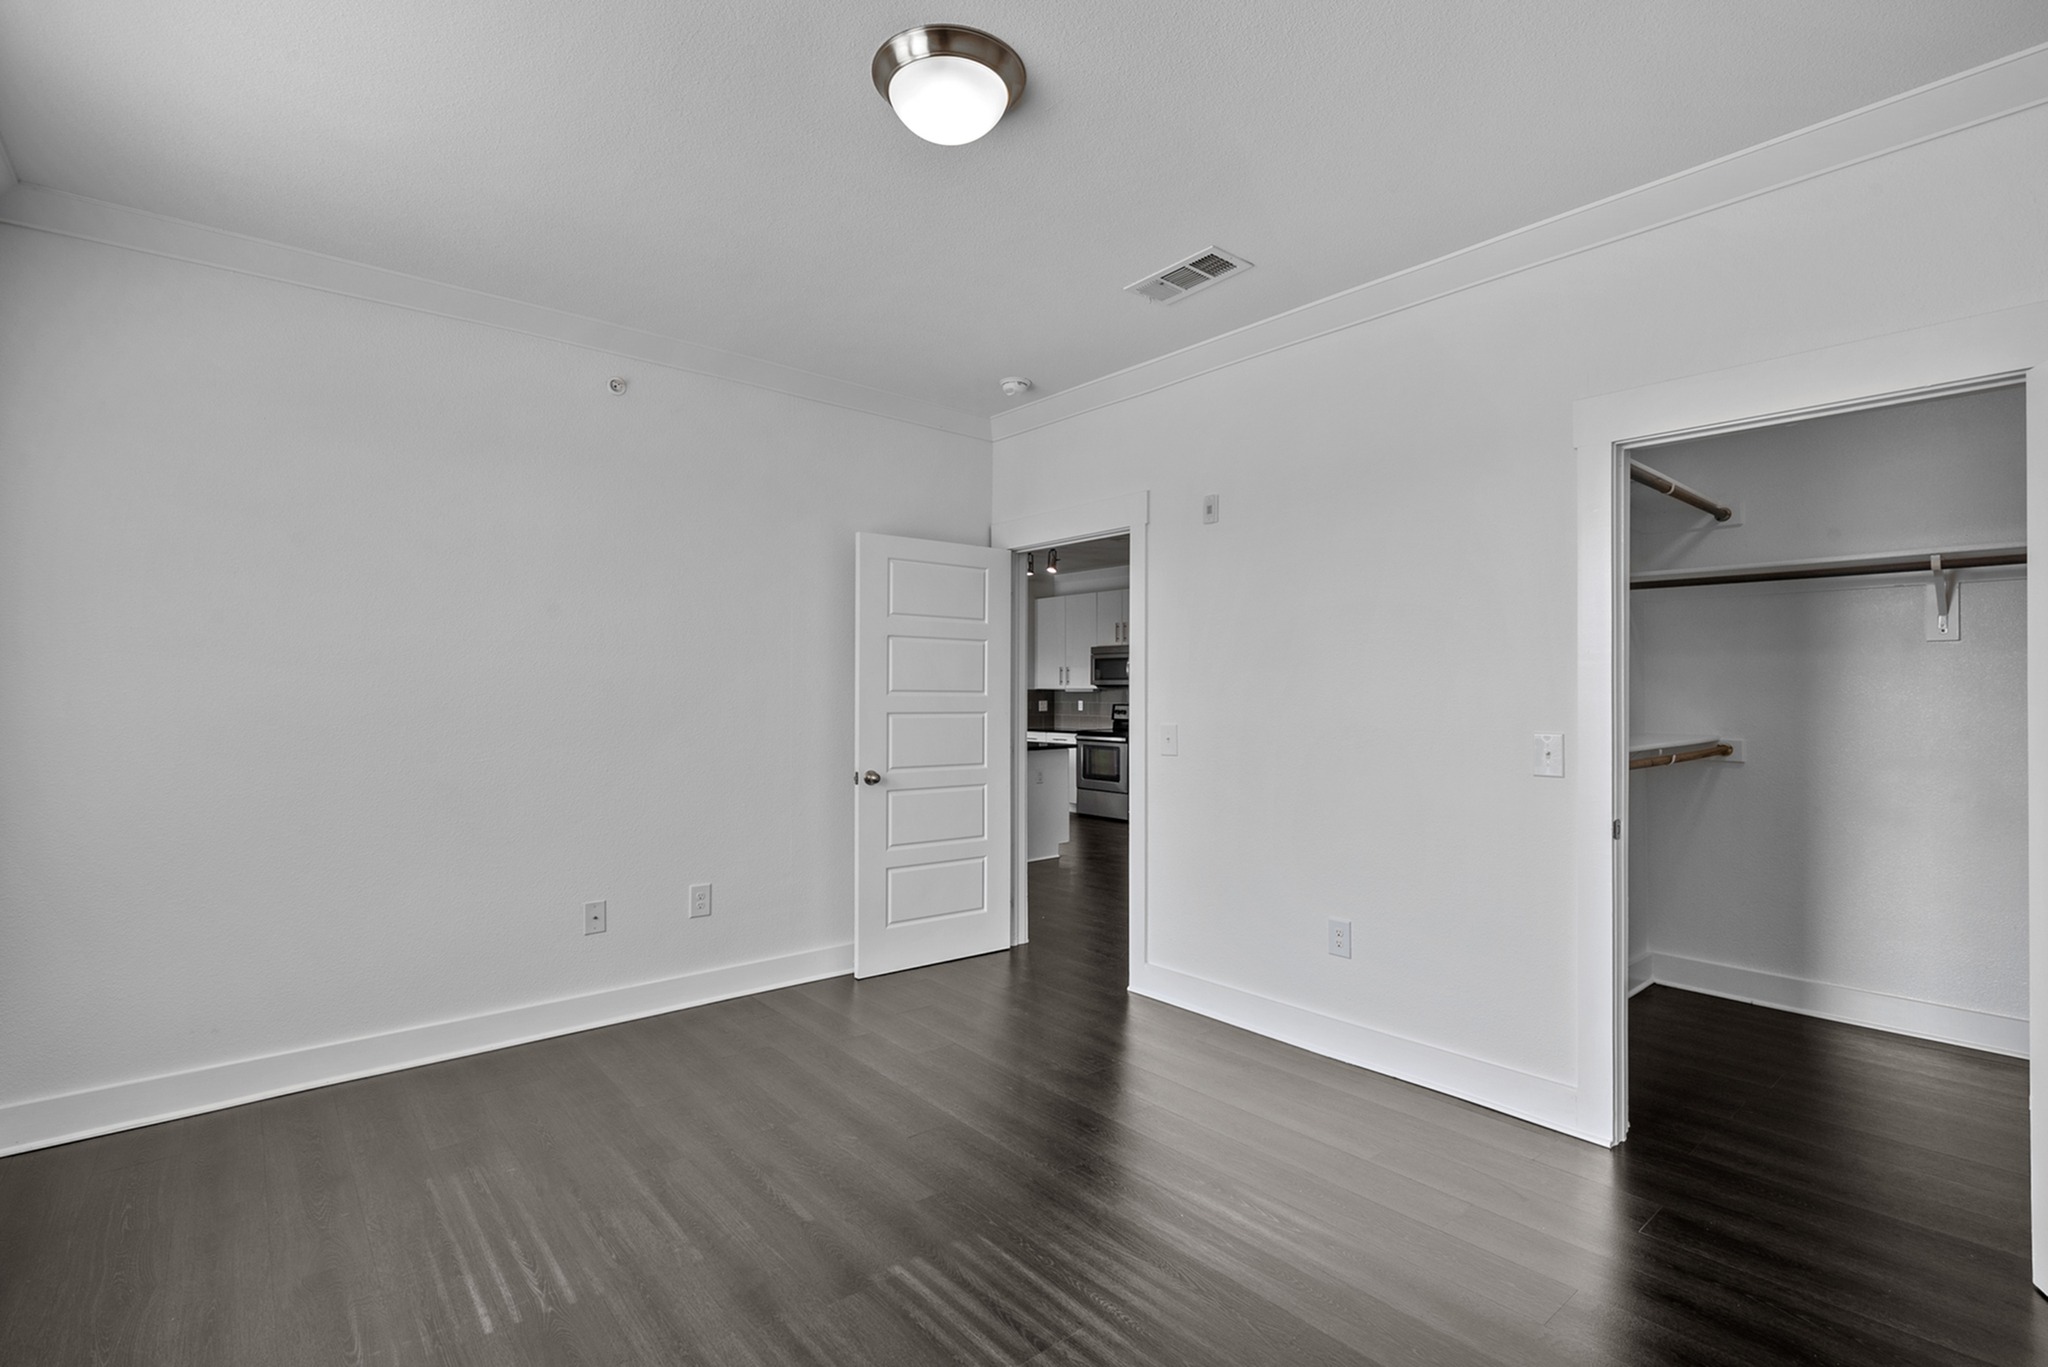 Floor Plan 4 Closet | Apartments In Conroe TX | The Towers Woodland